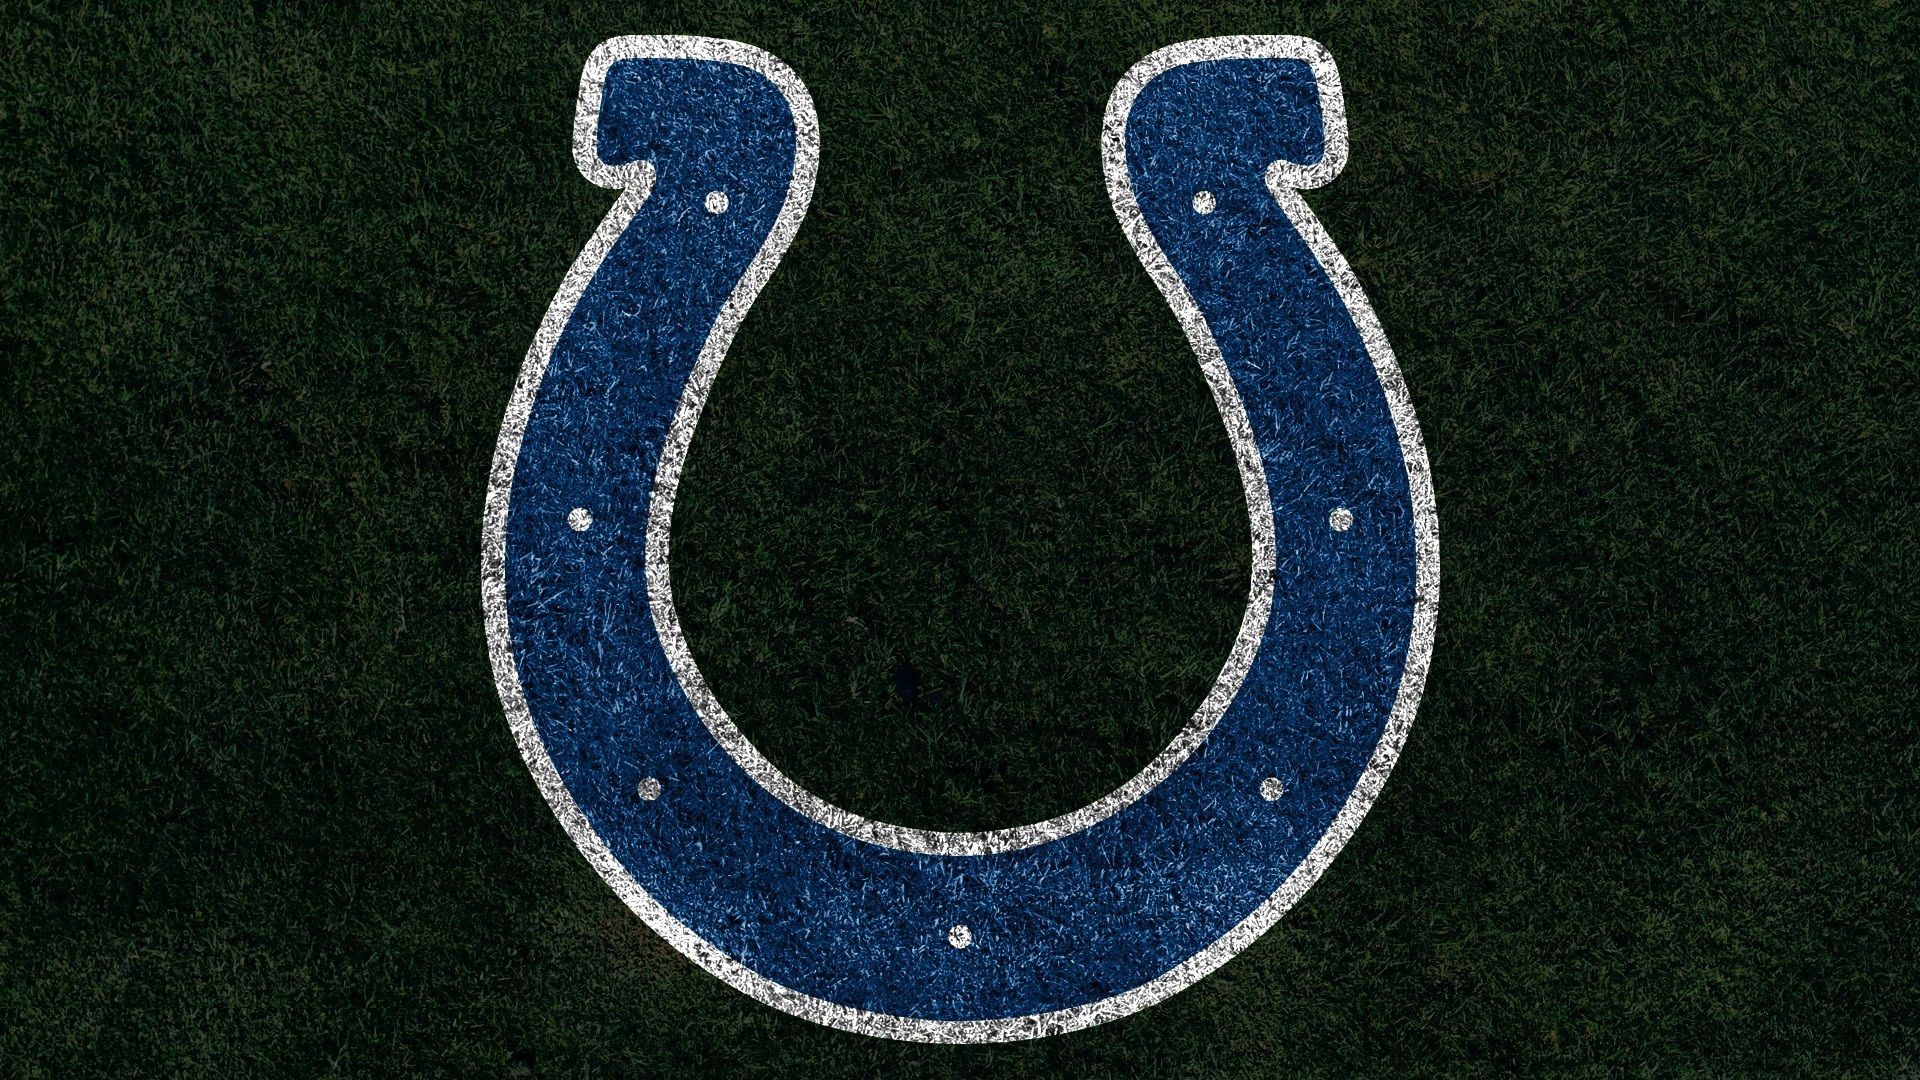 Wallpapers HD Indianapolis Colts 1920x1080